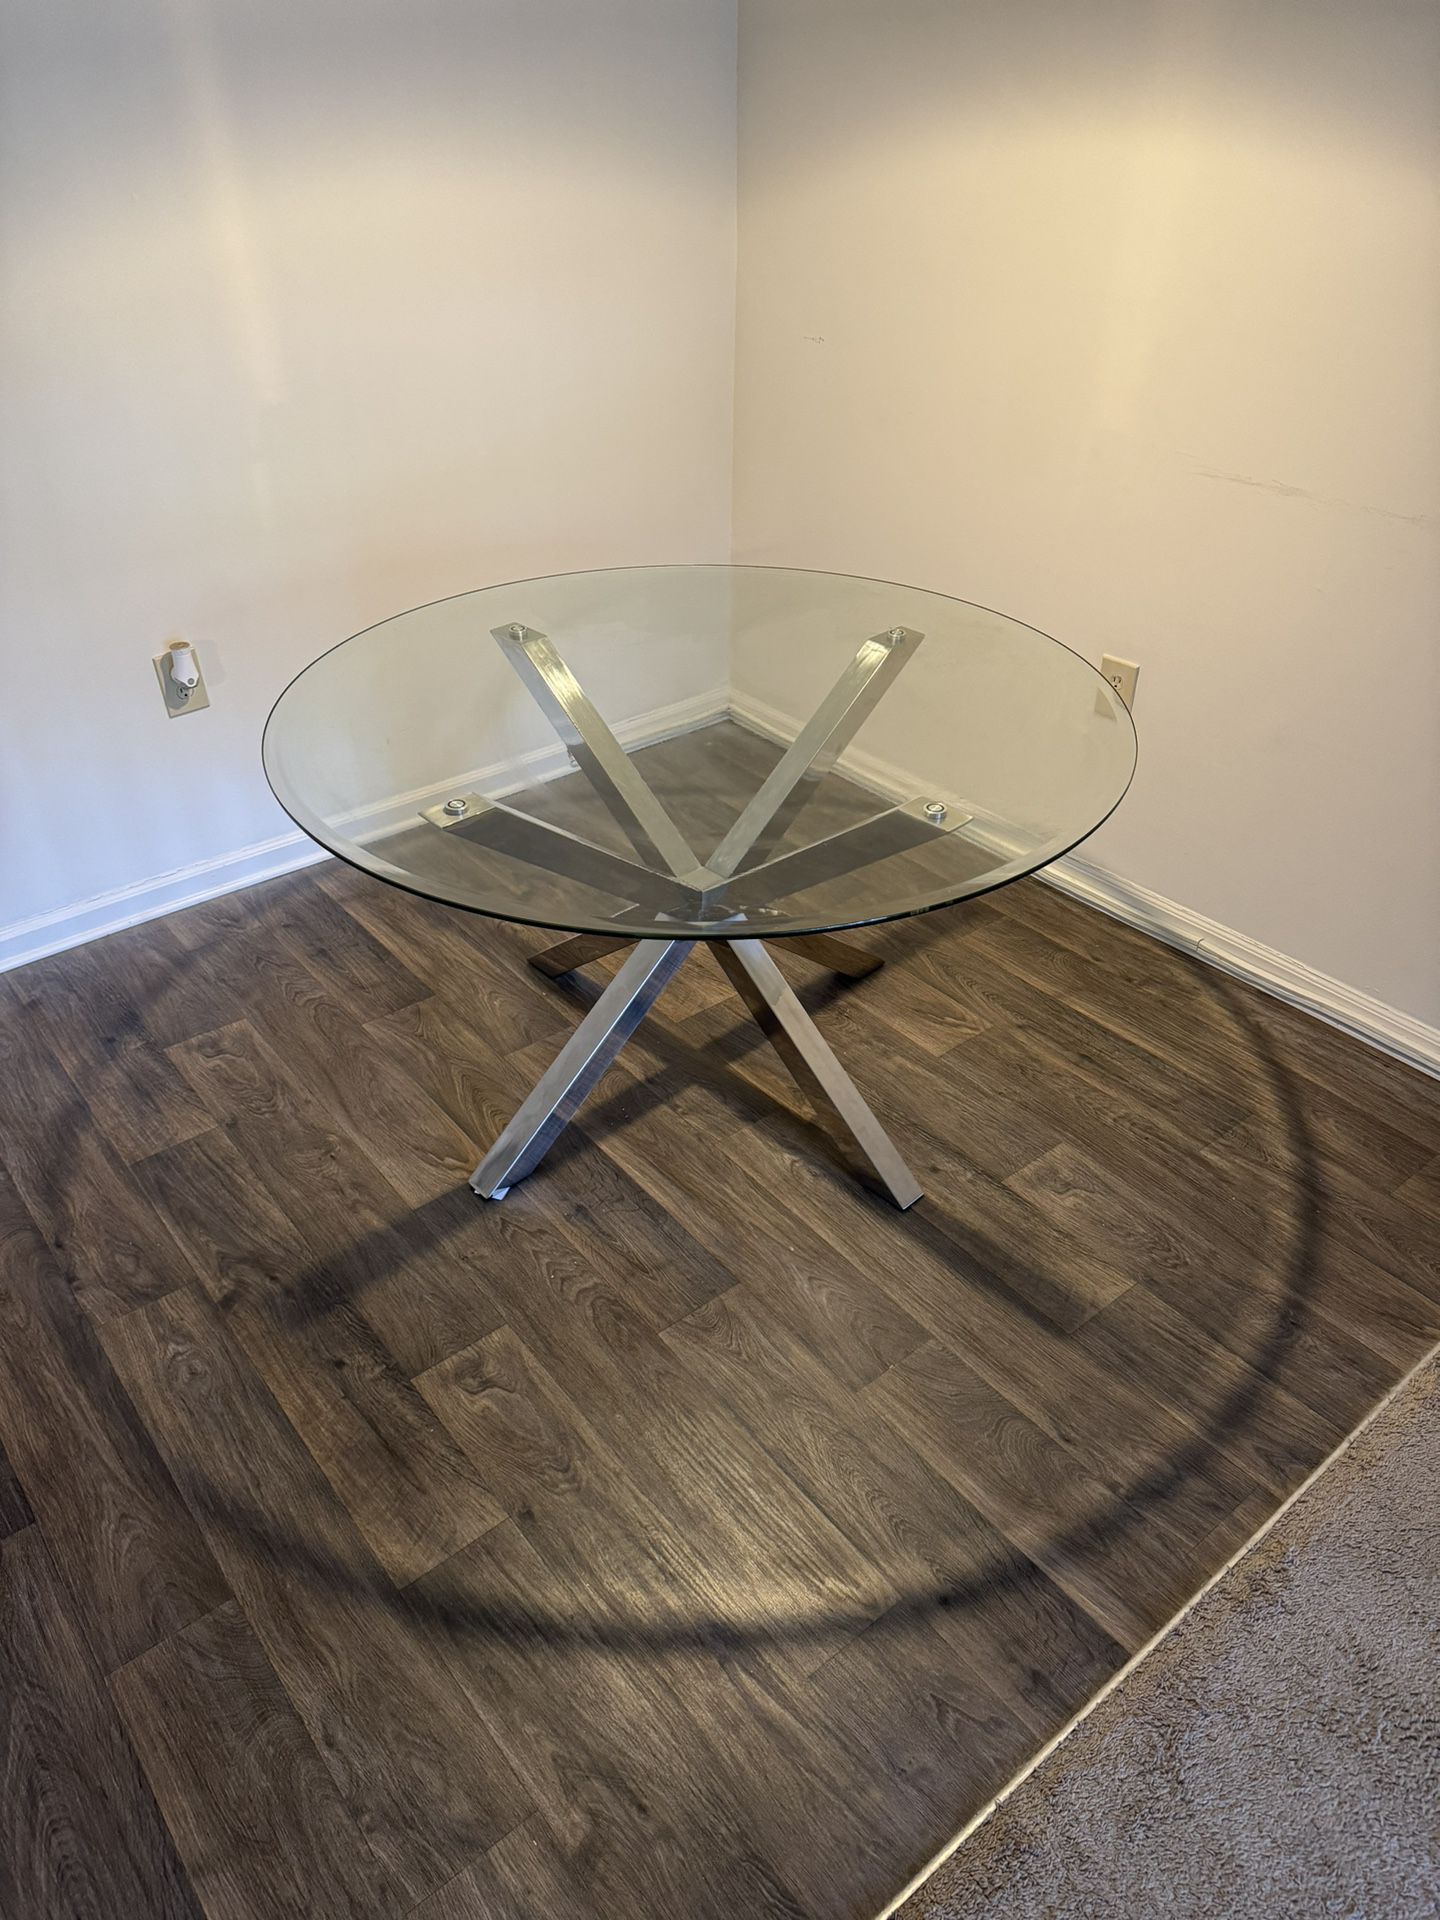 Linton Park Silver Round Dining Table